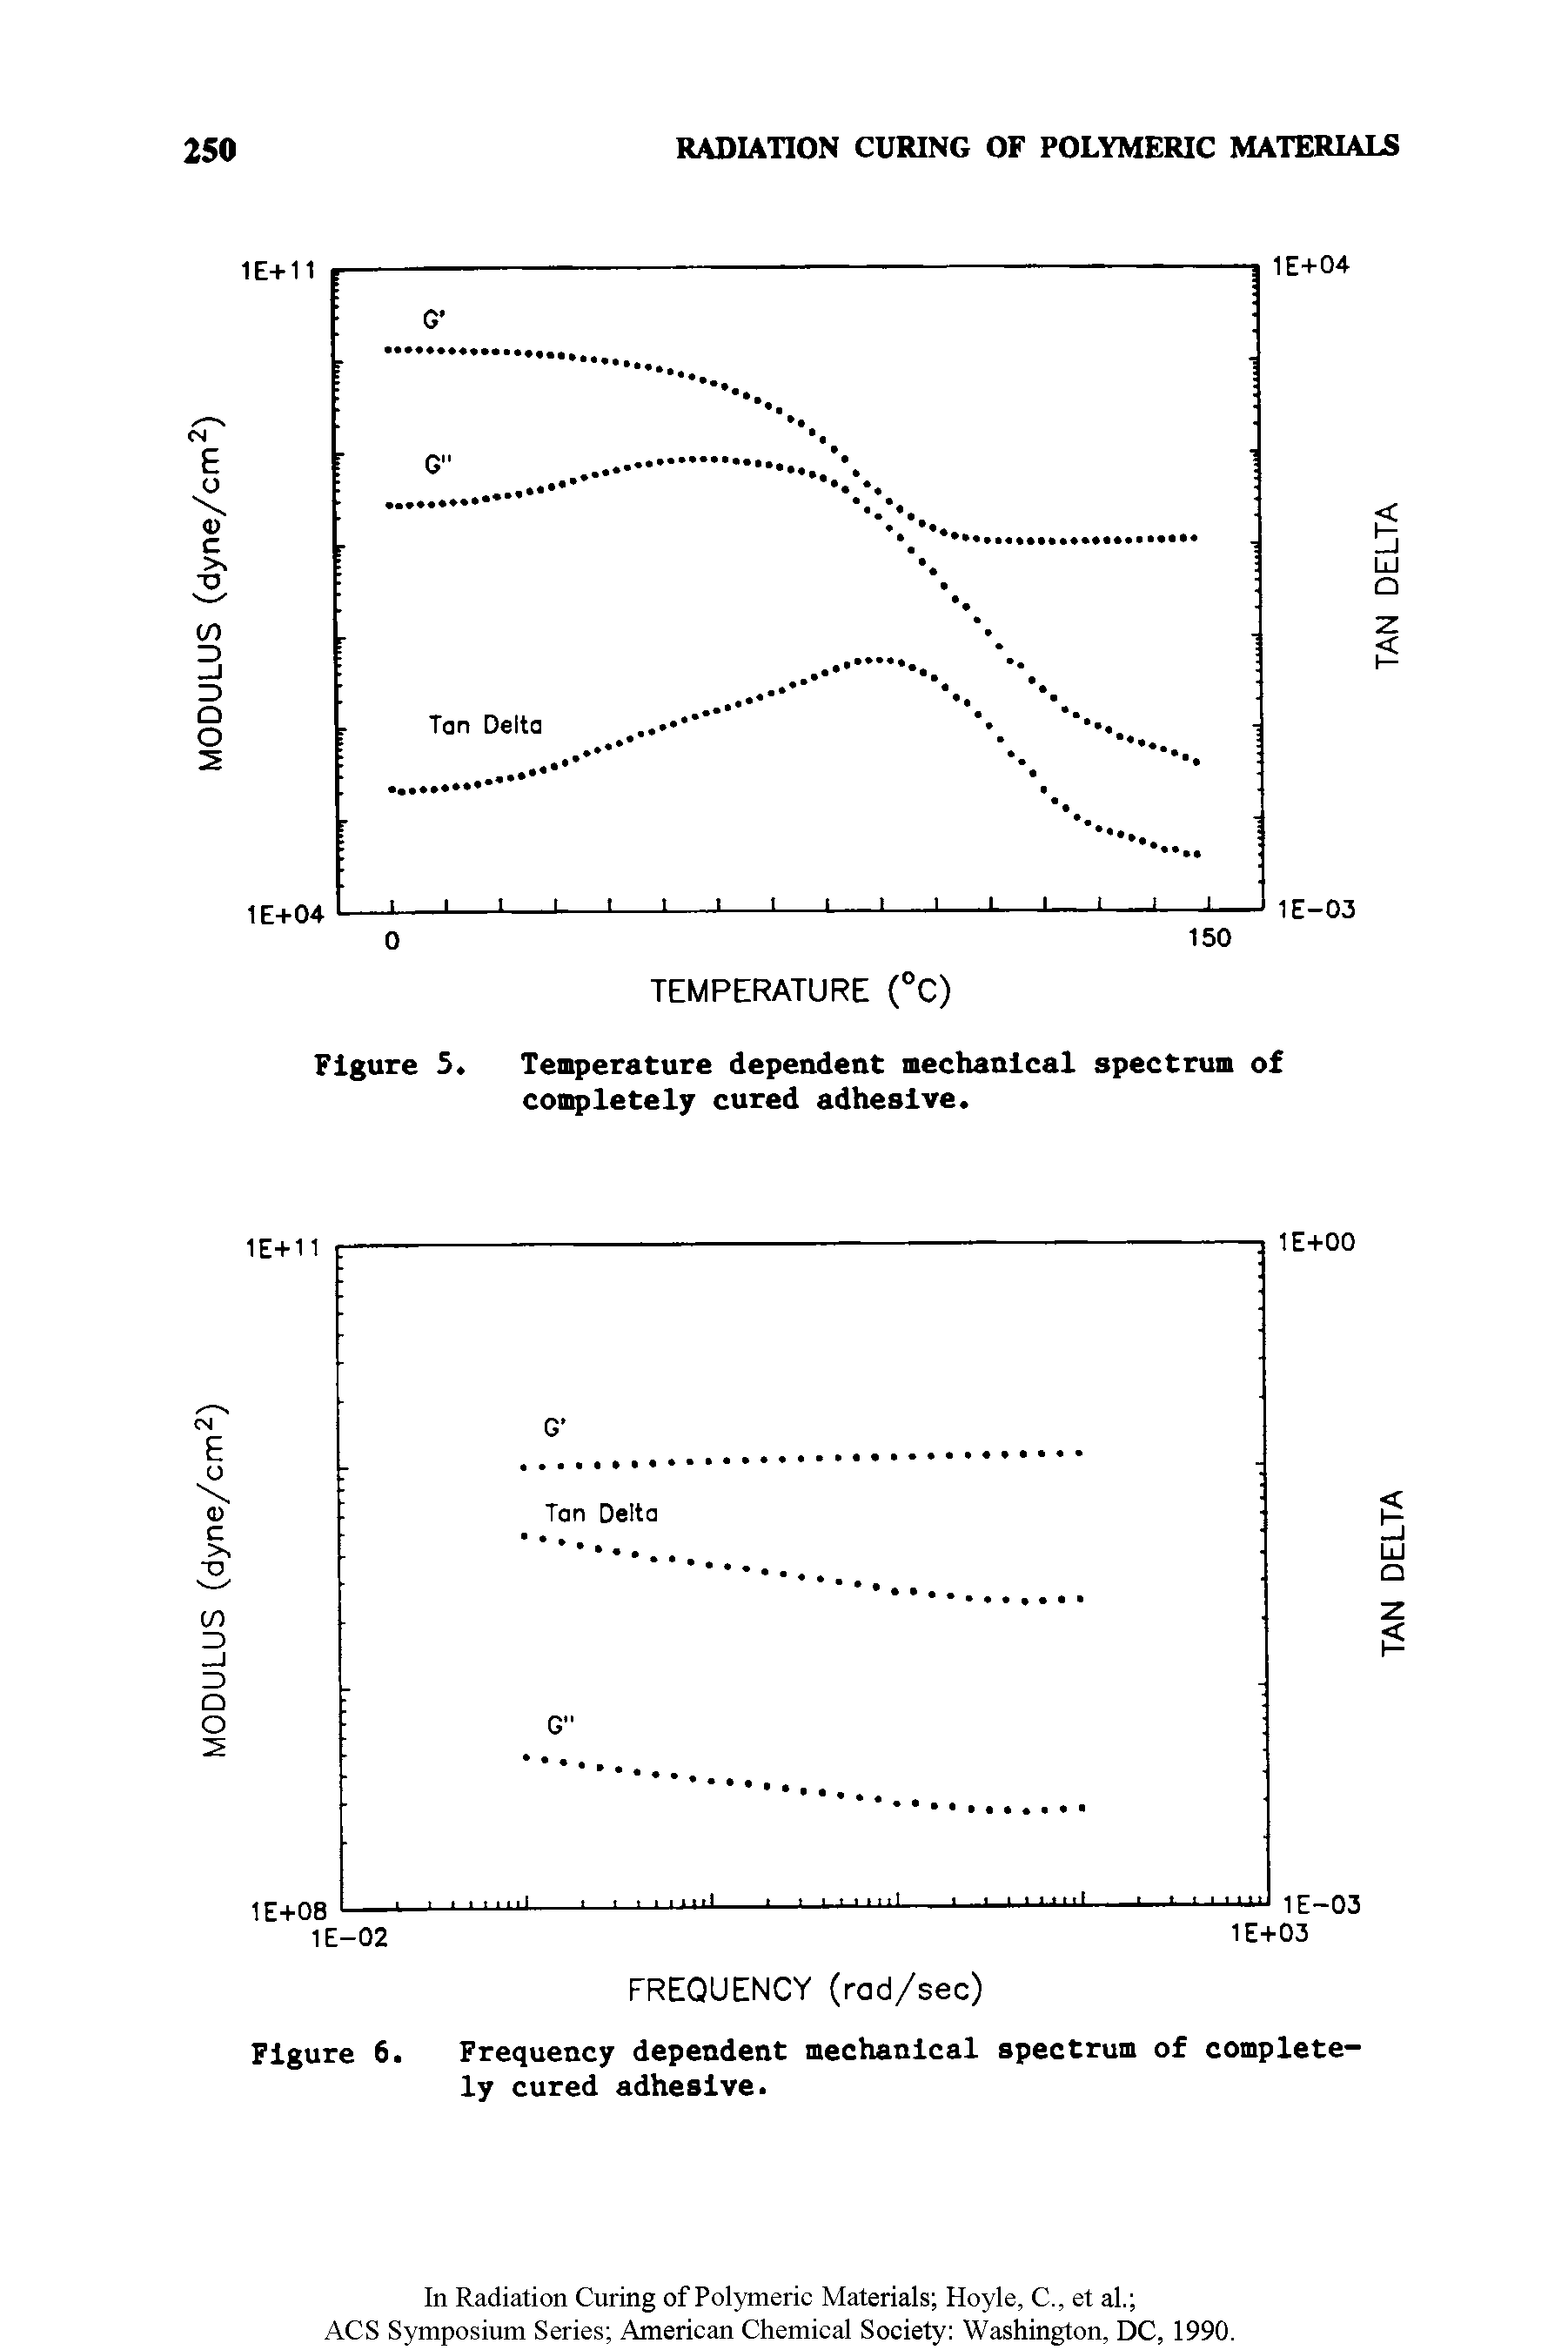 Figure 5. Temperature dependent mechanical spectrum of completely cured adhesive.